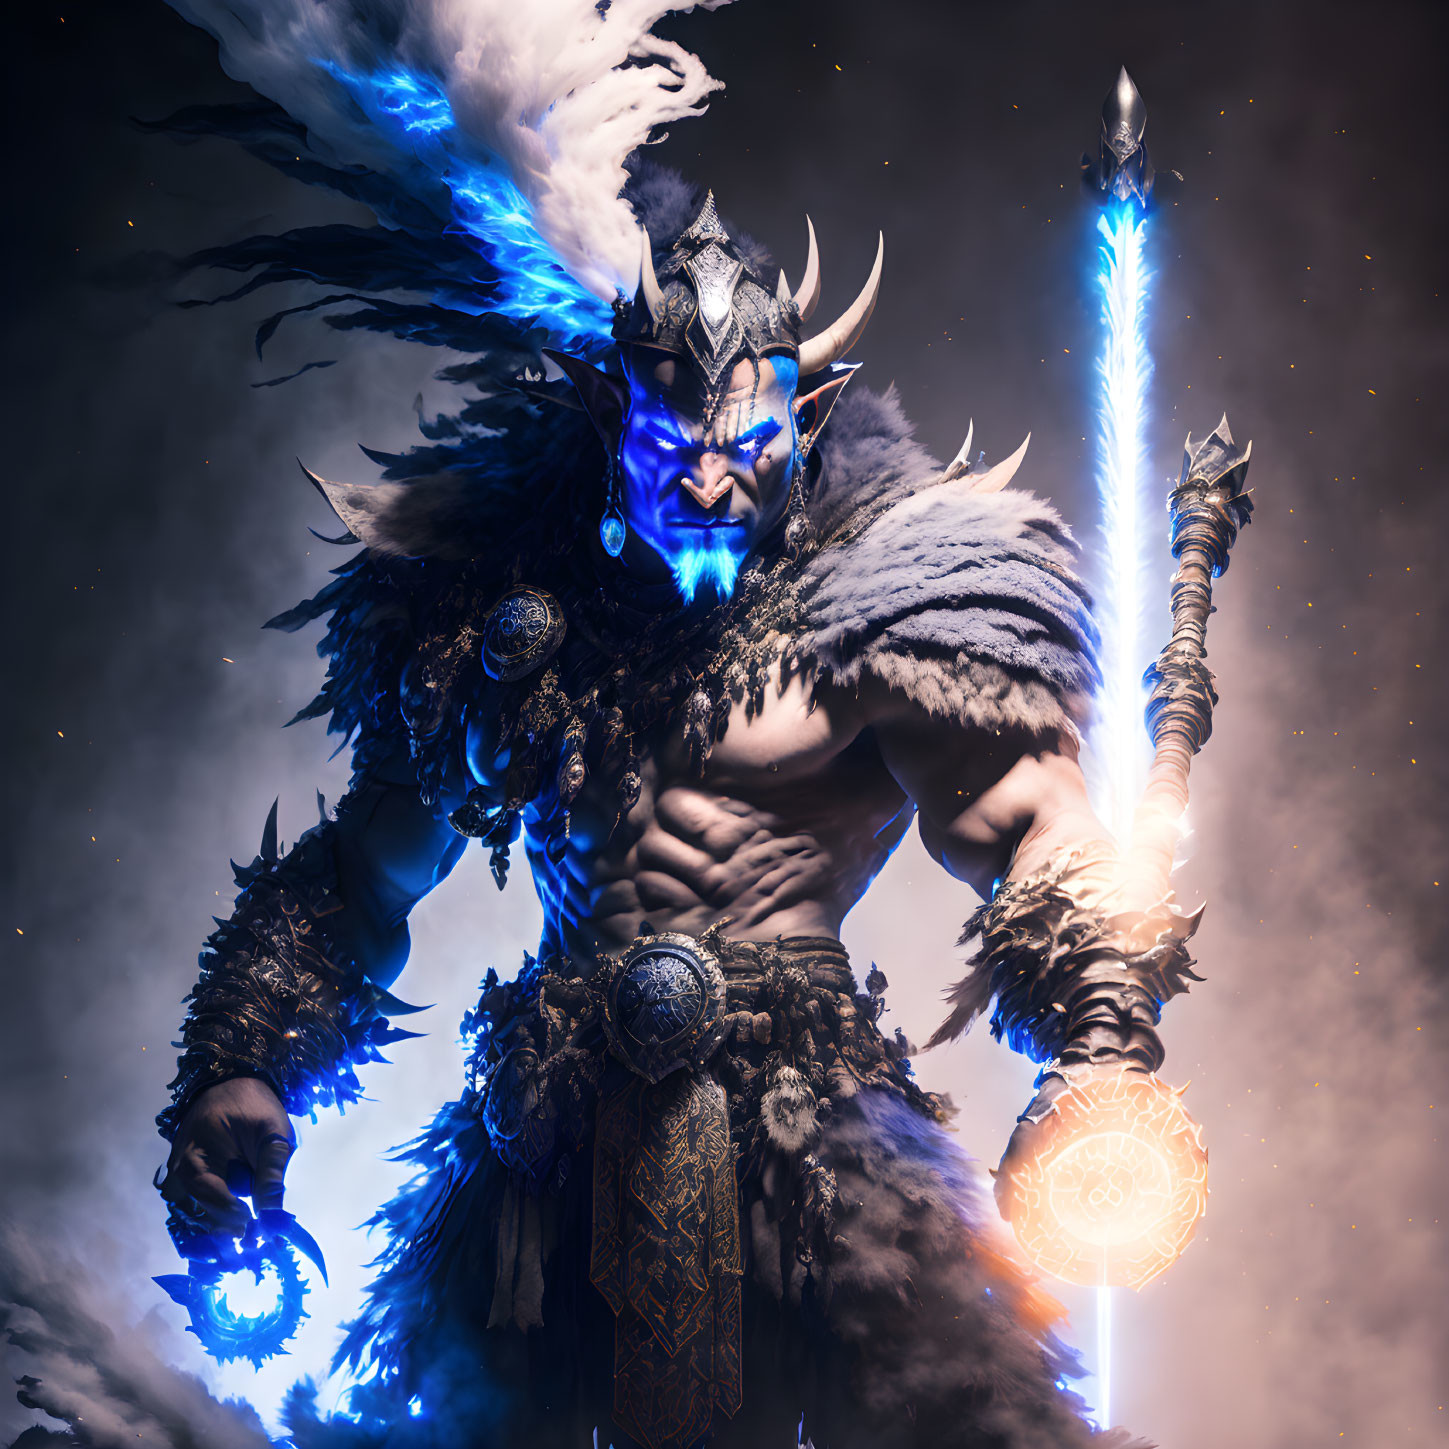 Fantasy warrior with glowing blue eyes and spear in horned armor against starry sky